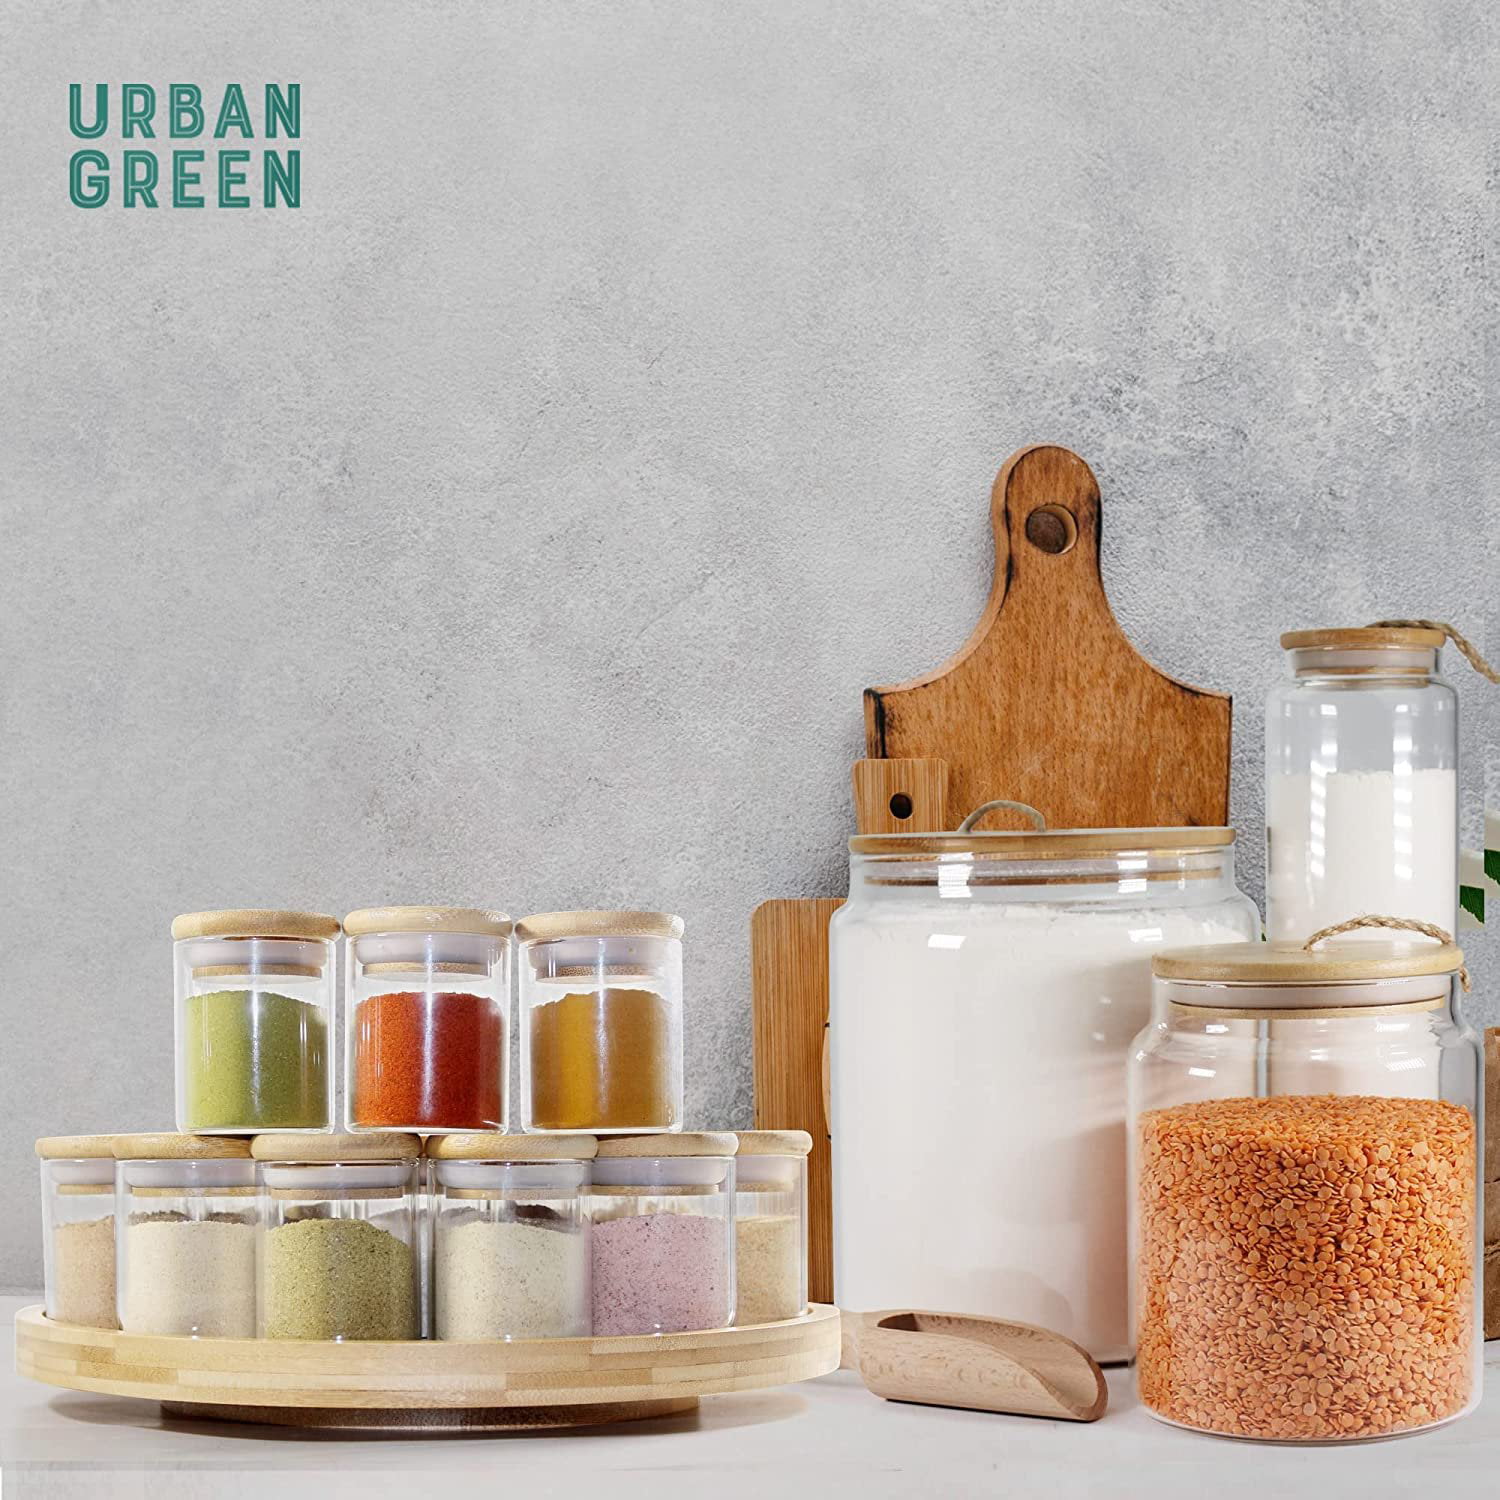 ALANI Slim Glass Spice Jars With Bamboo Lid Size 210ml Organise Pantry 